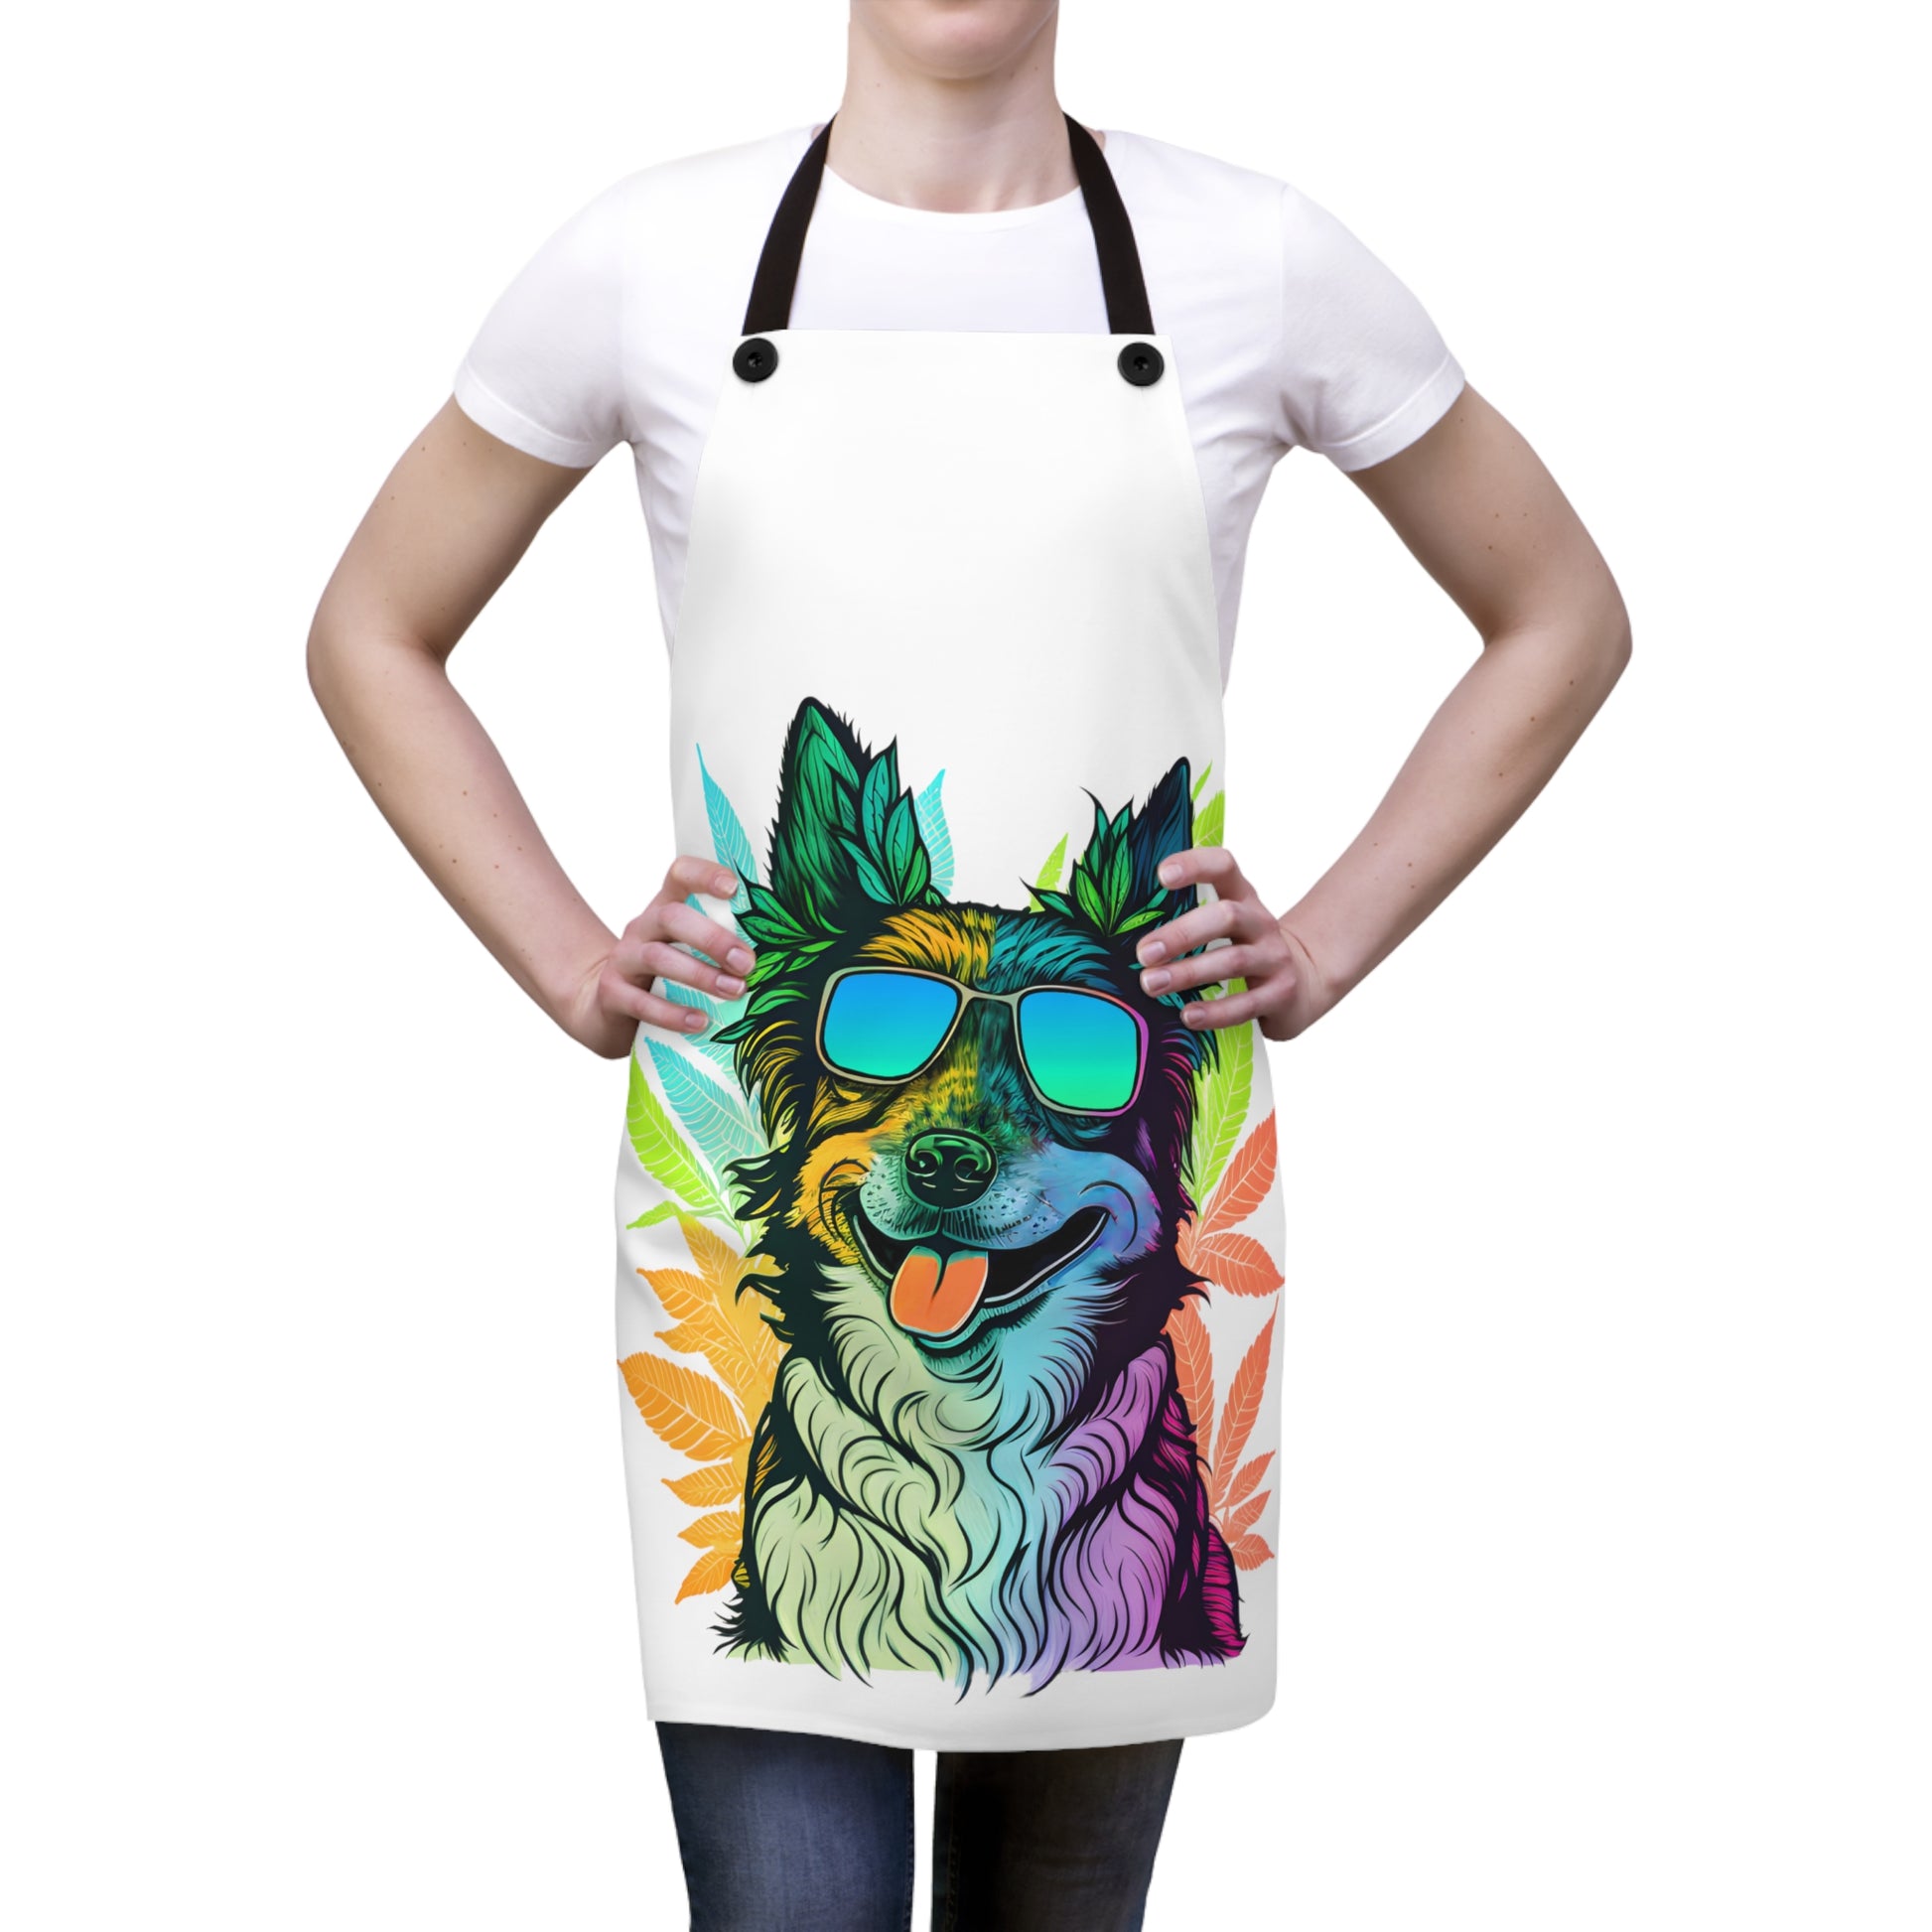 Photo of a person standing still while wearing the Cool Border Collie with Sunglasses and Cannabis Leaves Chef's Apron